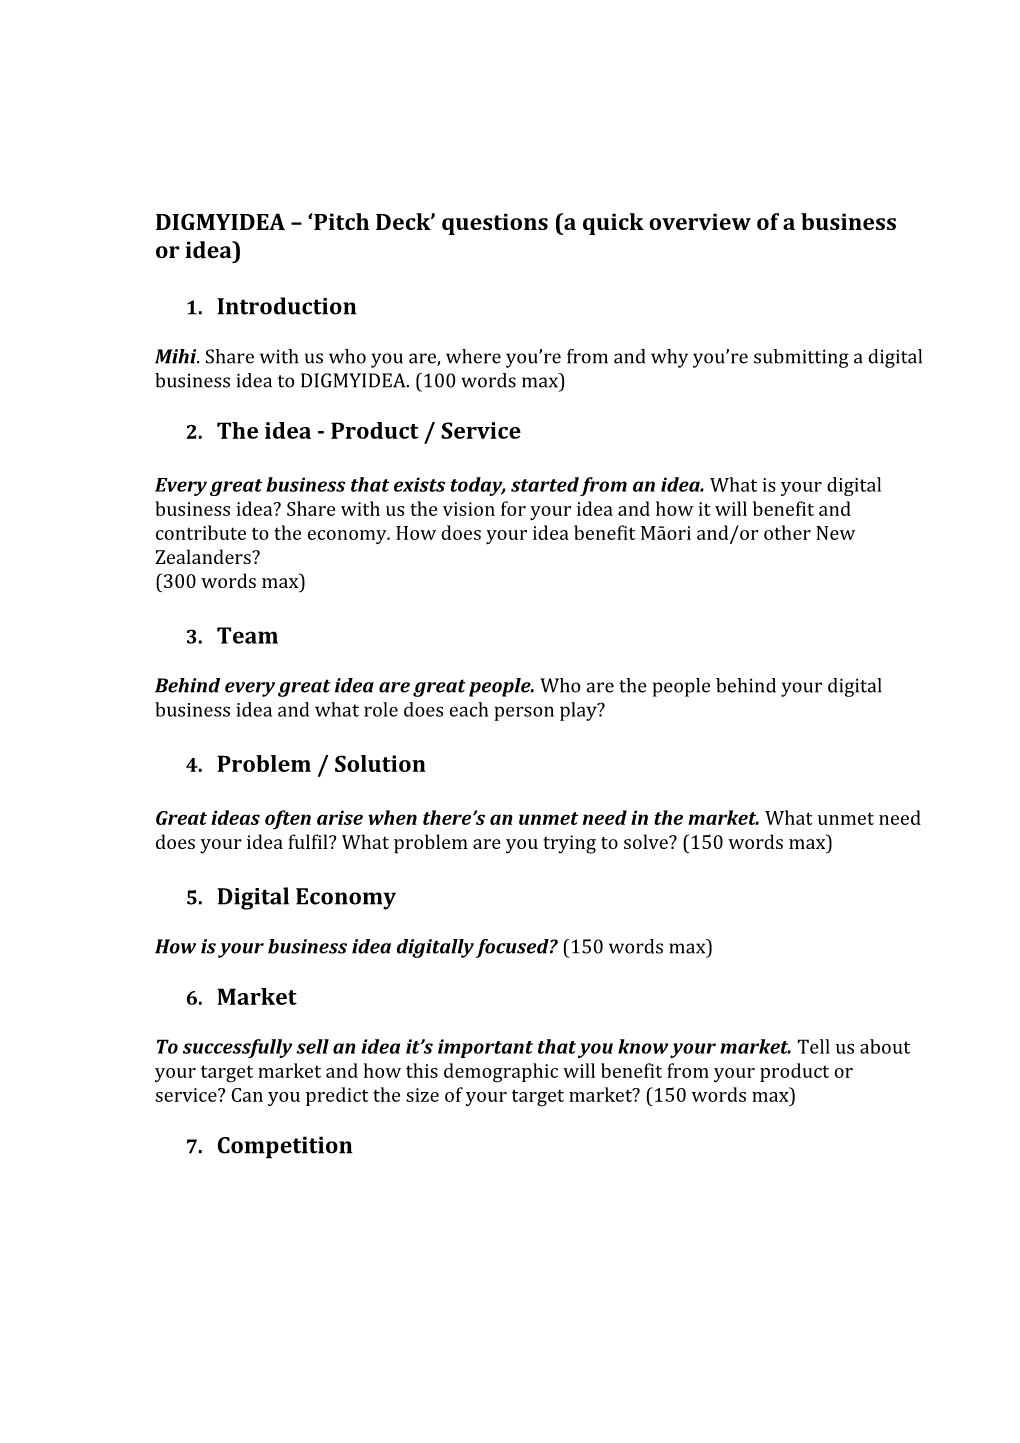 DIGMYIDEA Pitch Deck Questions (A Quick Overview of a Business Or Idea)